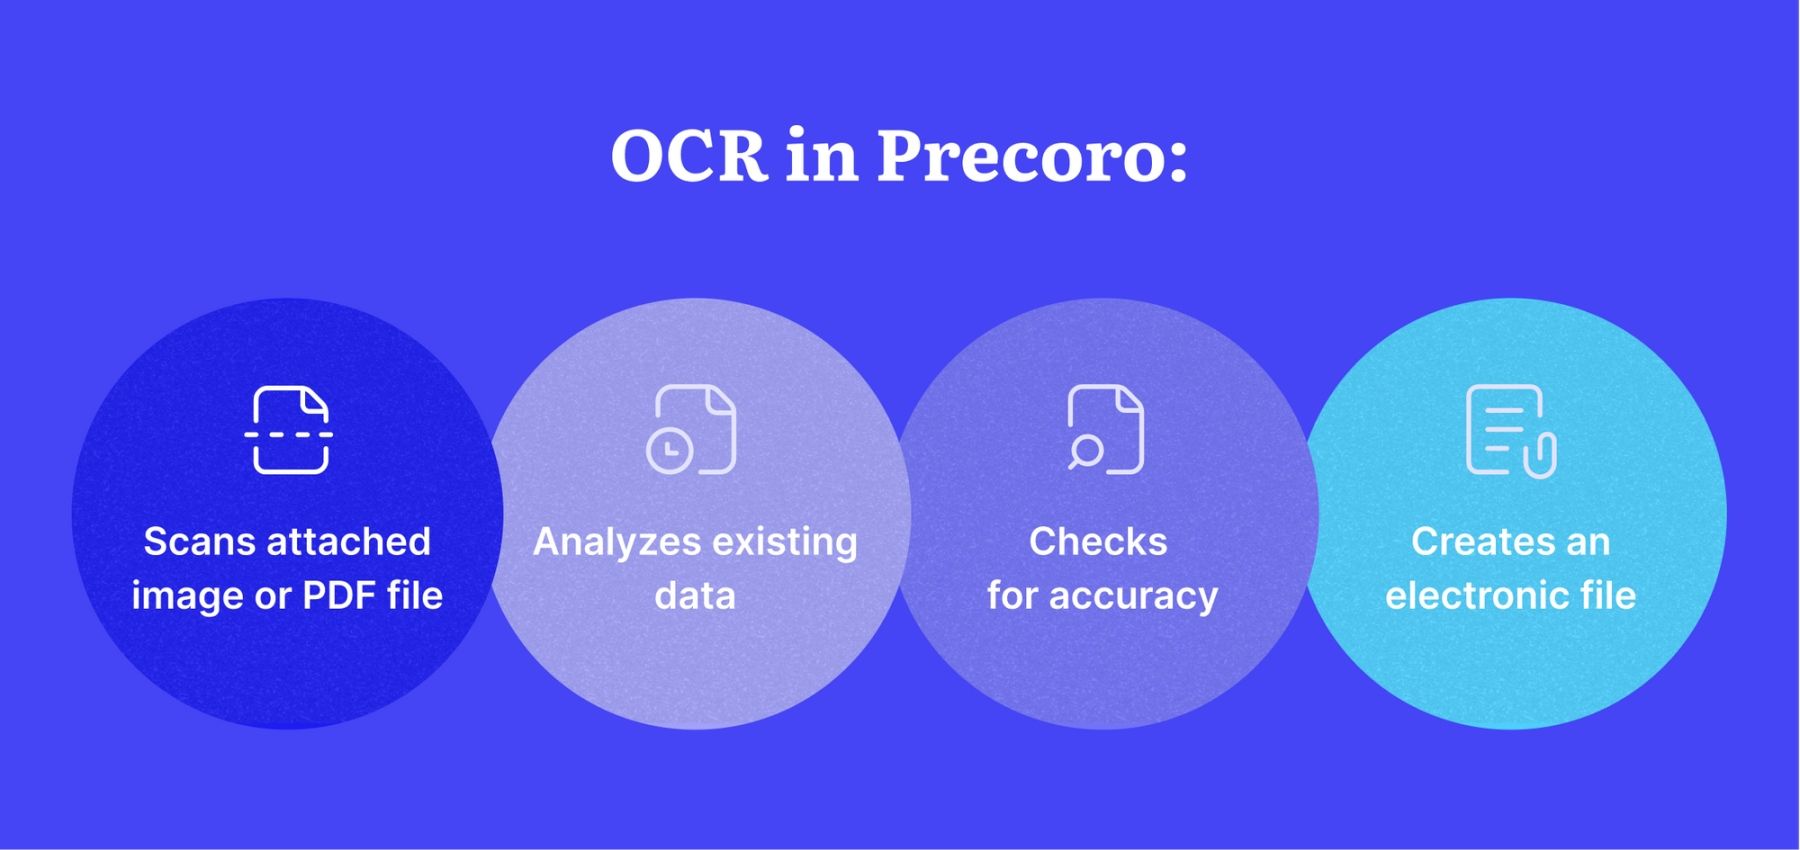 what ocr in precoro does